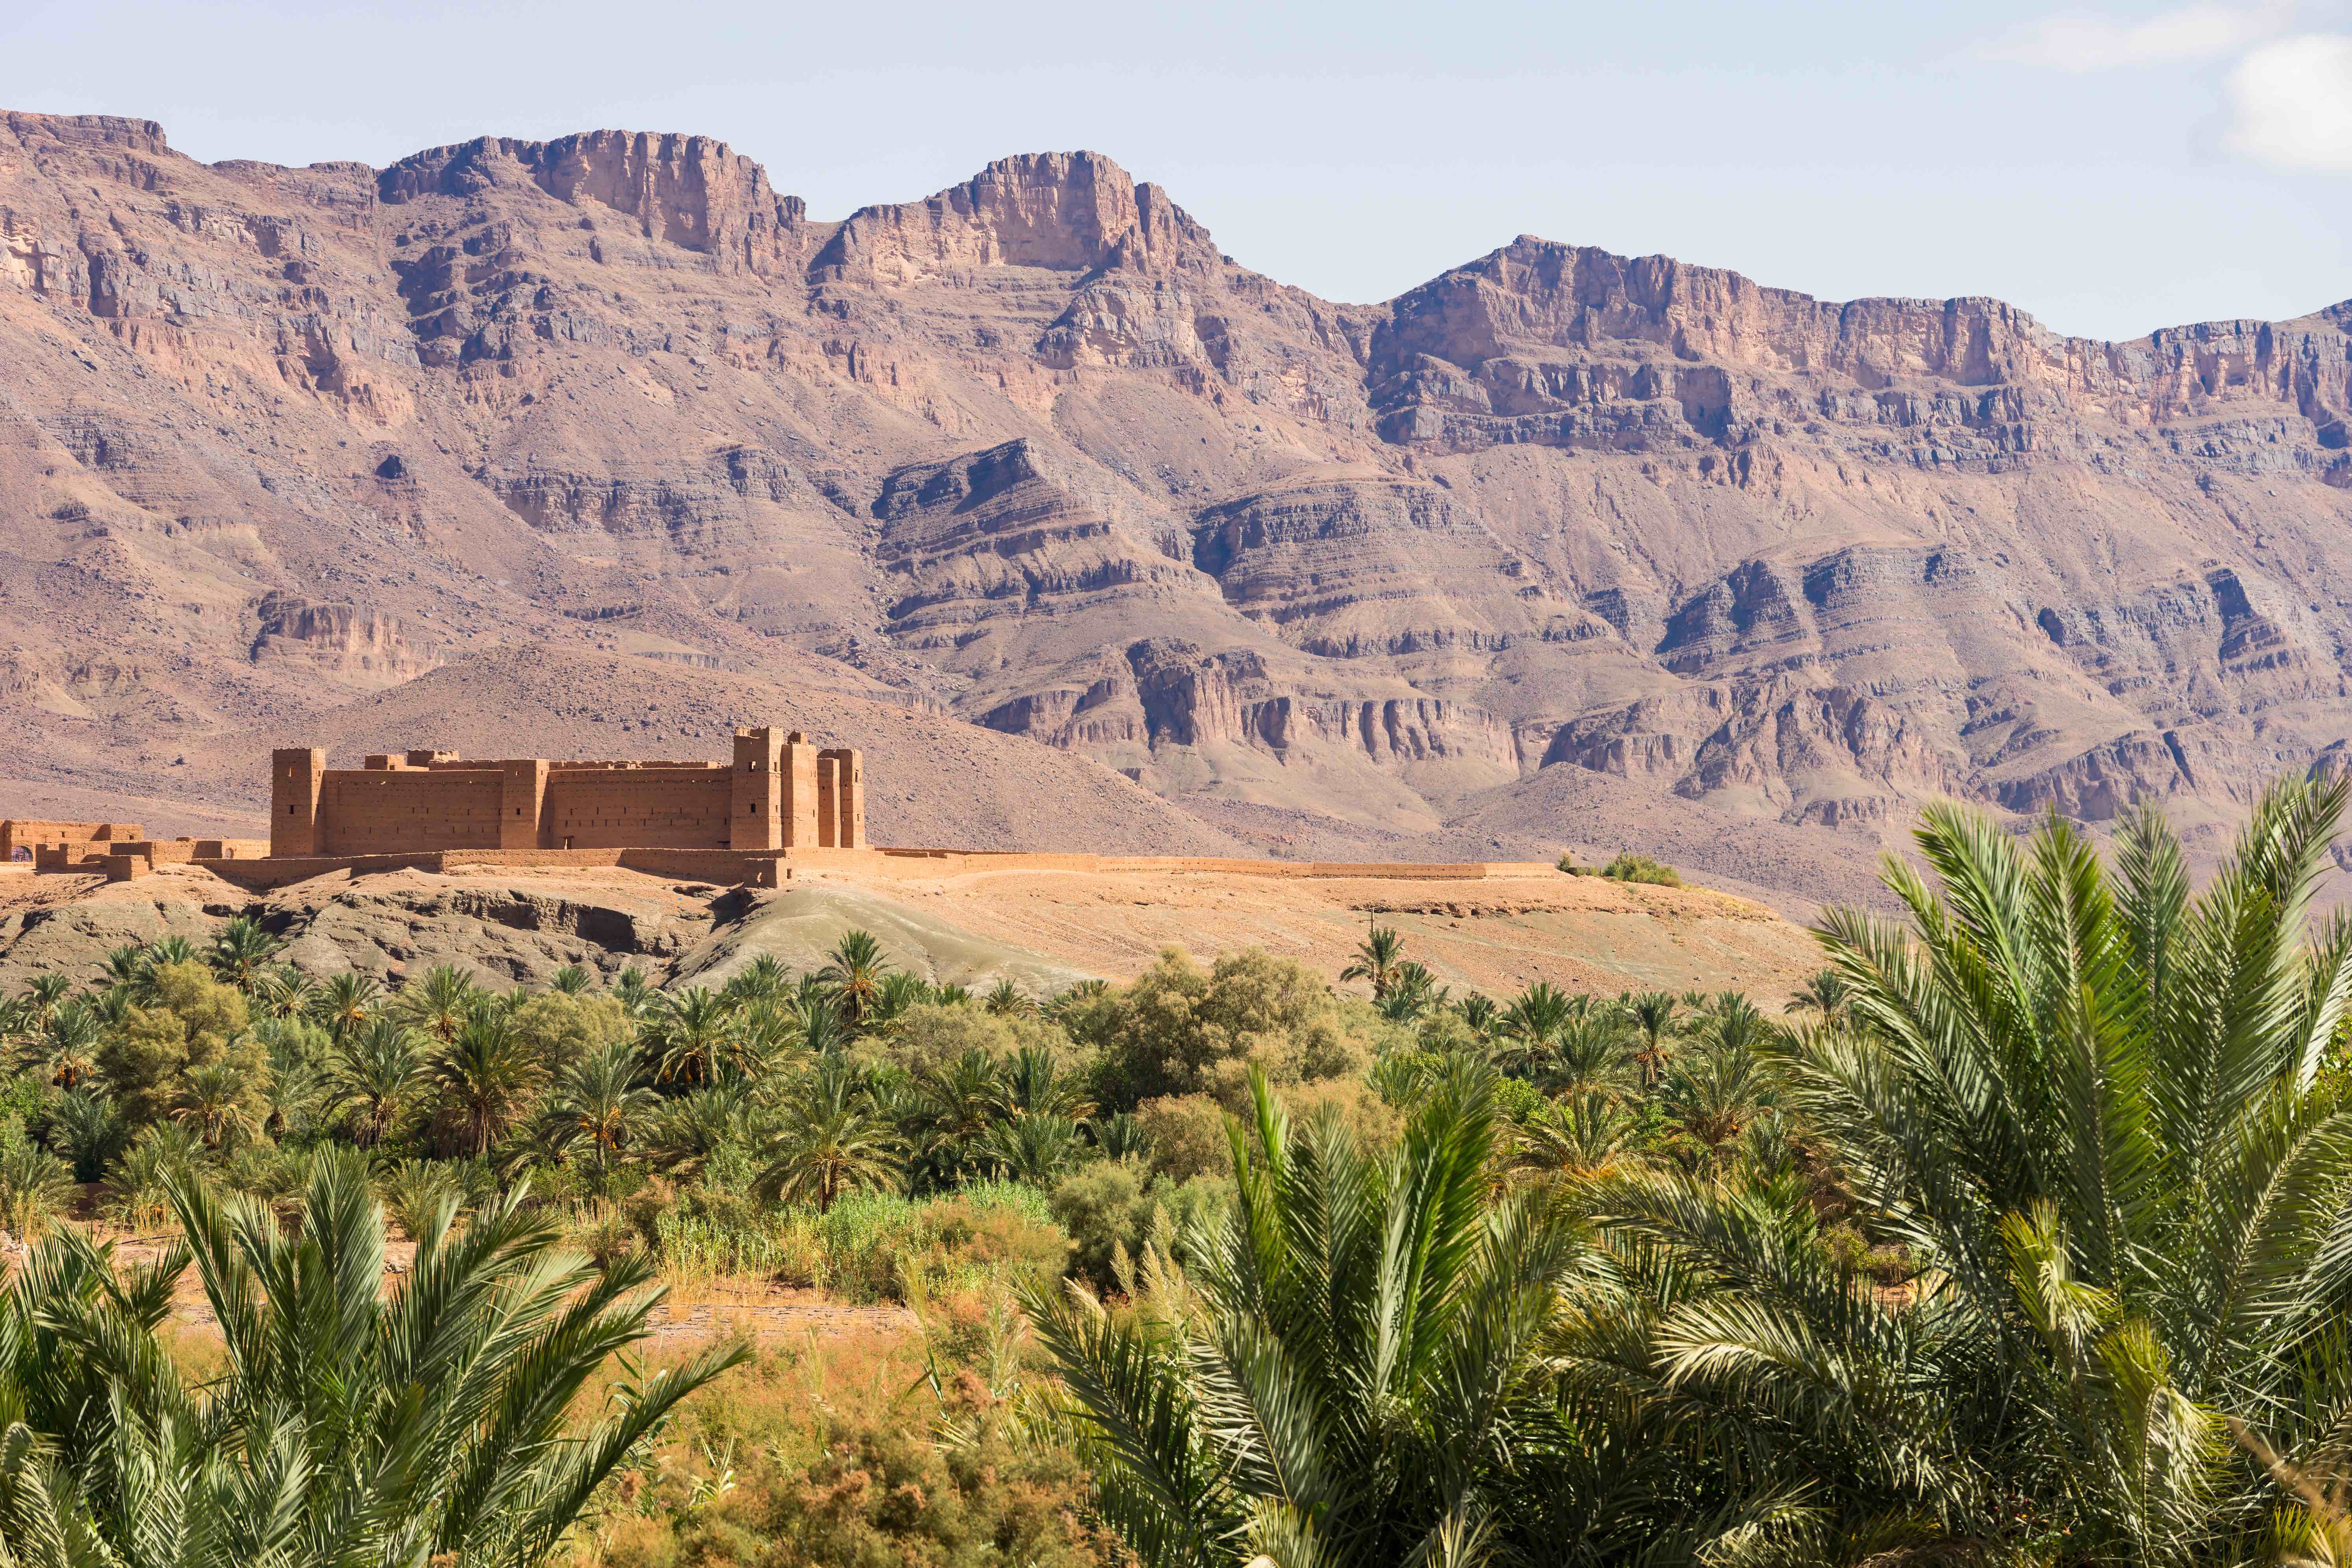 The Draa Valley